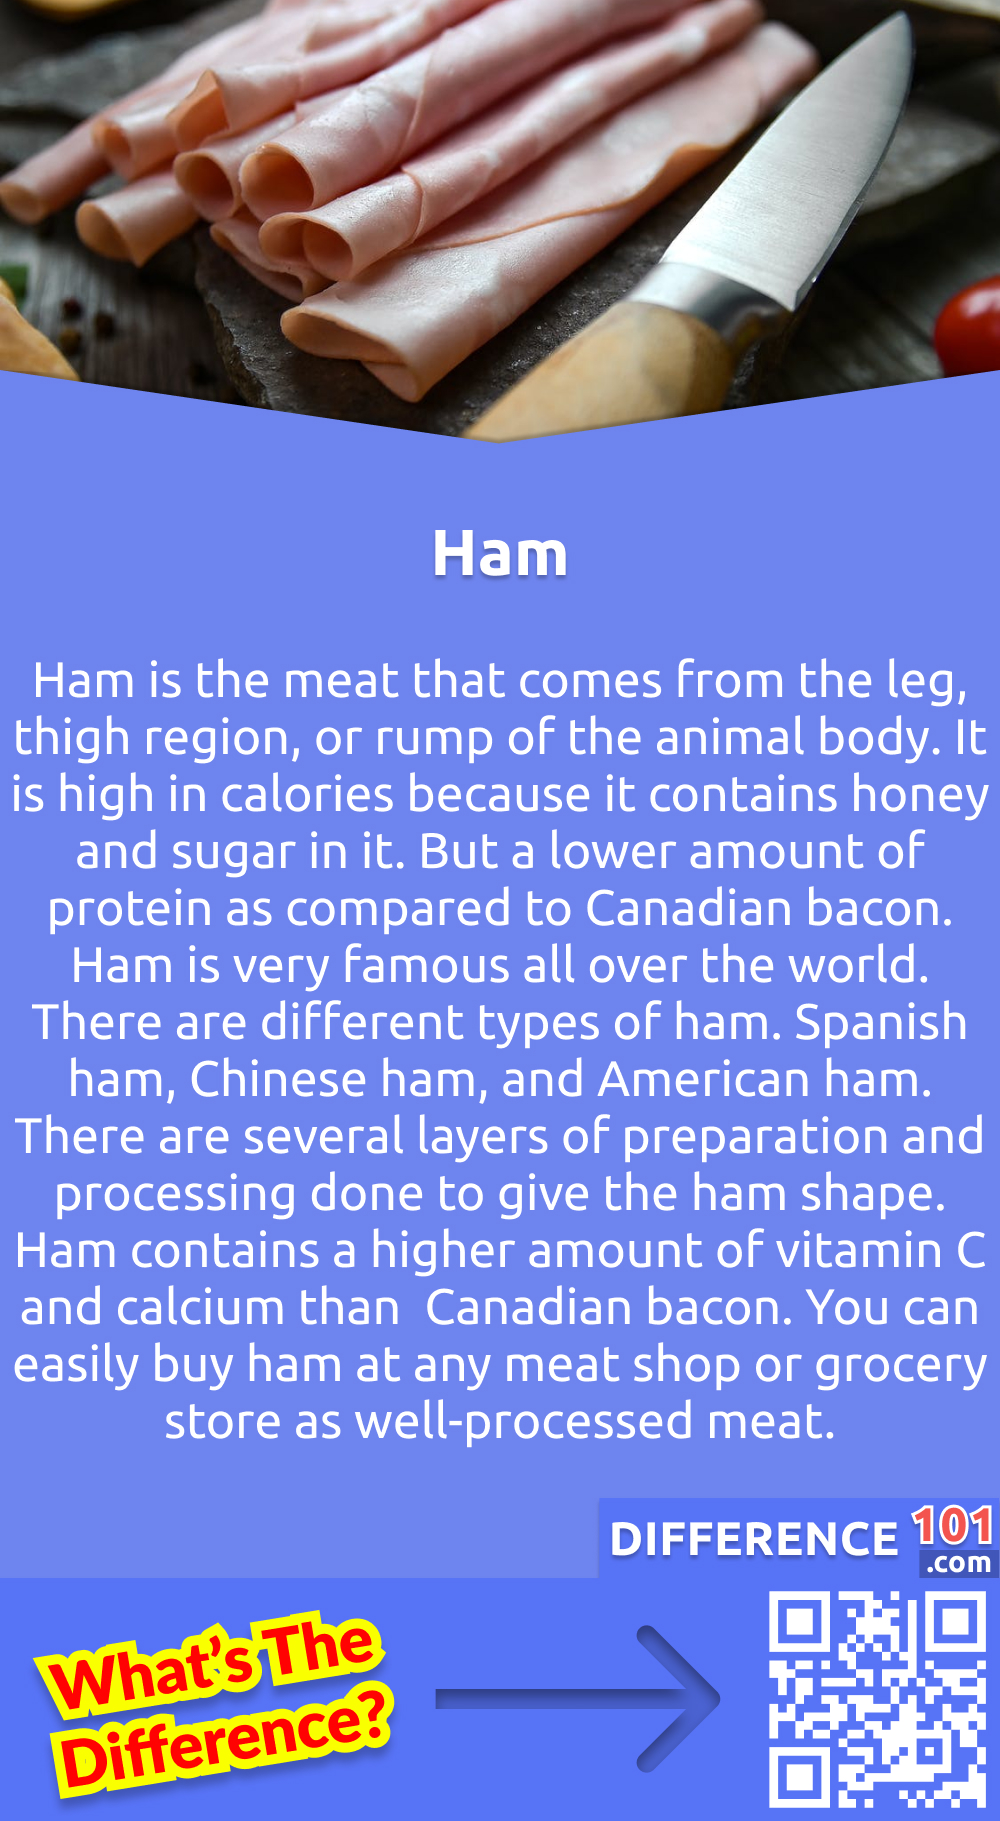 What is Ham? Ham is the meat that comes from the leg, thigh region, or rump of the animal body. It is high in calories because it contains honey and sugar in it. But a lower amount of protein as compared to Canadian bacon. Ham is very famous all over the world. There are different types of ham. Spanish ham, Chinese ham, and American ham. There are several layers of preparation and processing done to give the ham shape. Ham contains a higher amount of vitamin C and calcium than  Canadian bacon. You can easily buy ham at any meat shop or grocery store as well-processed meat.